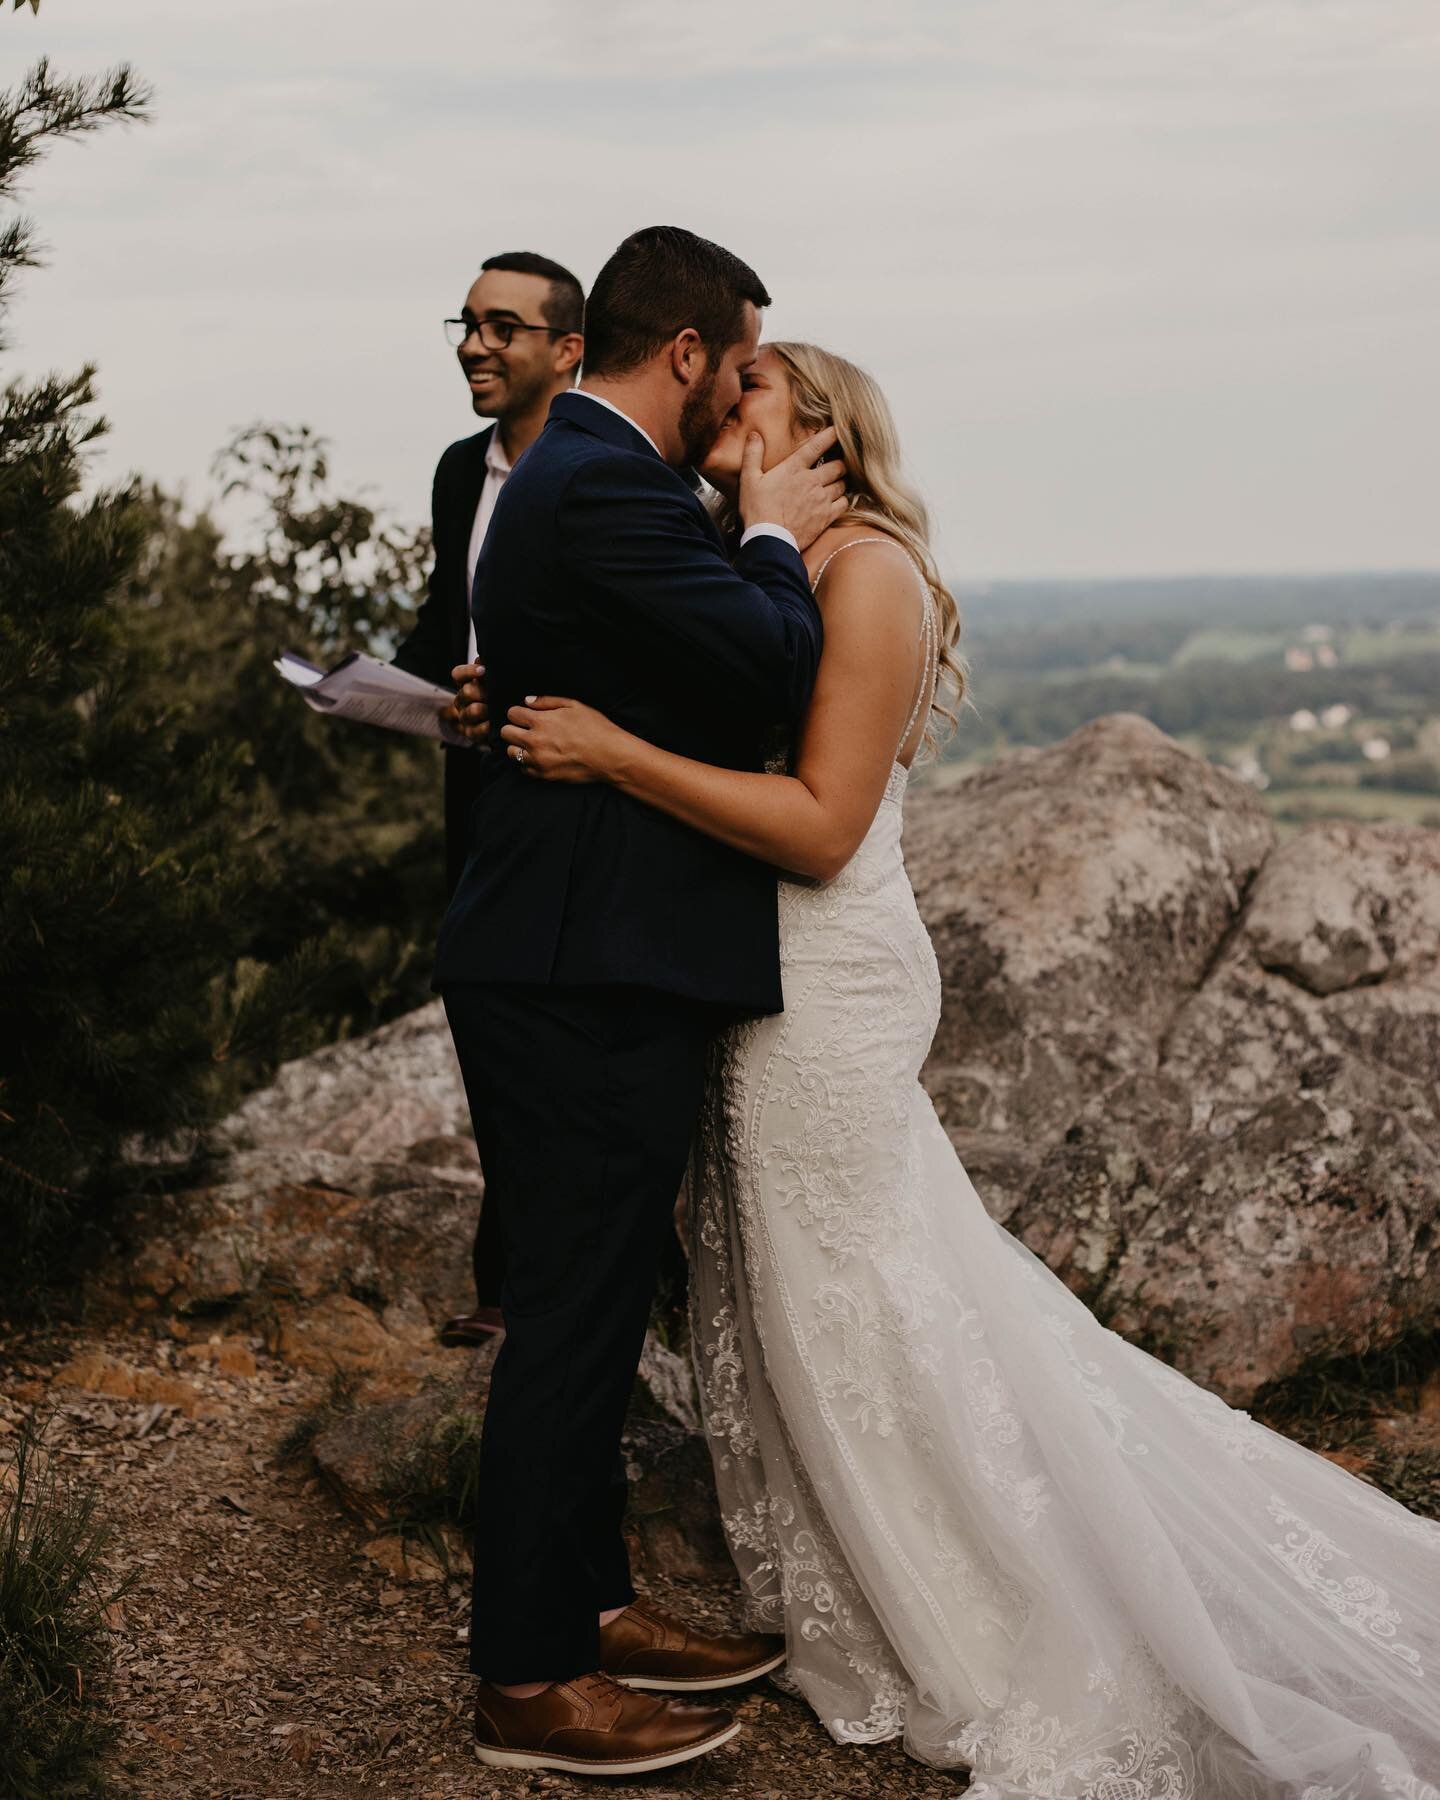 These two really went through the ringer when it came to planning their wedding. After a date change and 2 location changes they ended up eloping just before sunset at Sugarloaf mountain. Despite being plan C, Nick and Tara&rsquo;s big day was a beautiful celebration of the love they have for one another, and I&rsquo;m so glad I got to be a part of it! #covidcantstopthelove
-
-
-
-
#dcwedding #dcweddingphotographer #dcbride #dcengagement #dcphotographer #dirtyhairandmessybootspresets #dirtyhairandmessyboots